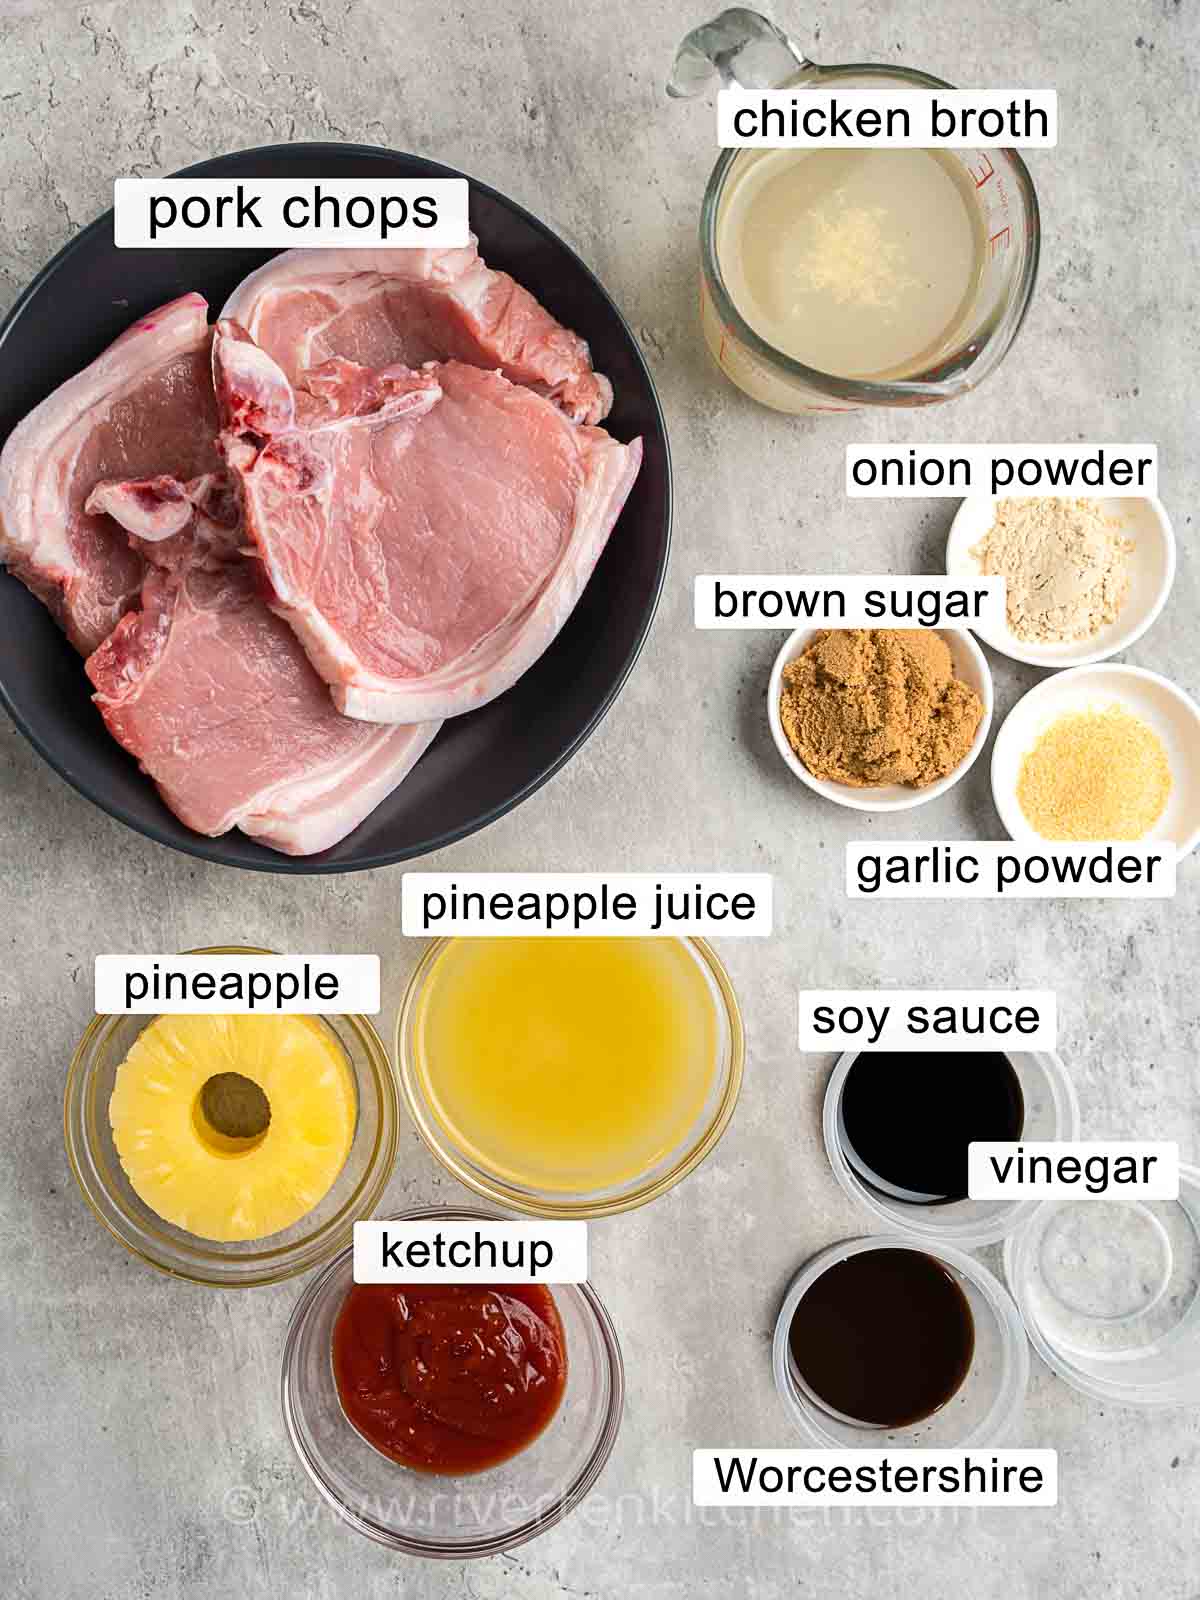 Pork chops, pineapple juice, ketchup, soy sauce, Worcestershire, brown sugar, garlic powder, onion powder, vinegar, chicken broth, and canned pineapple.